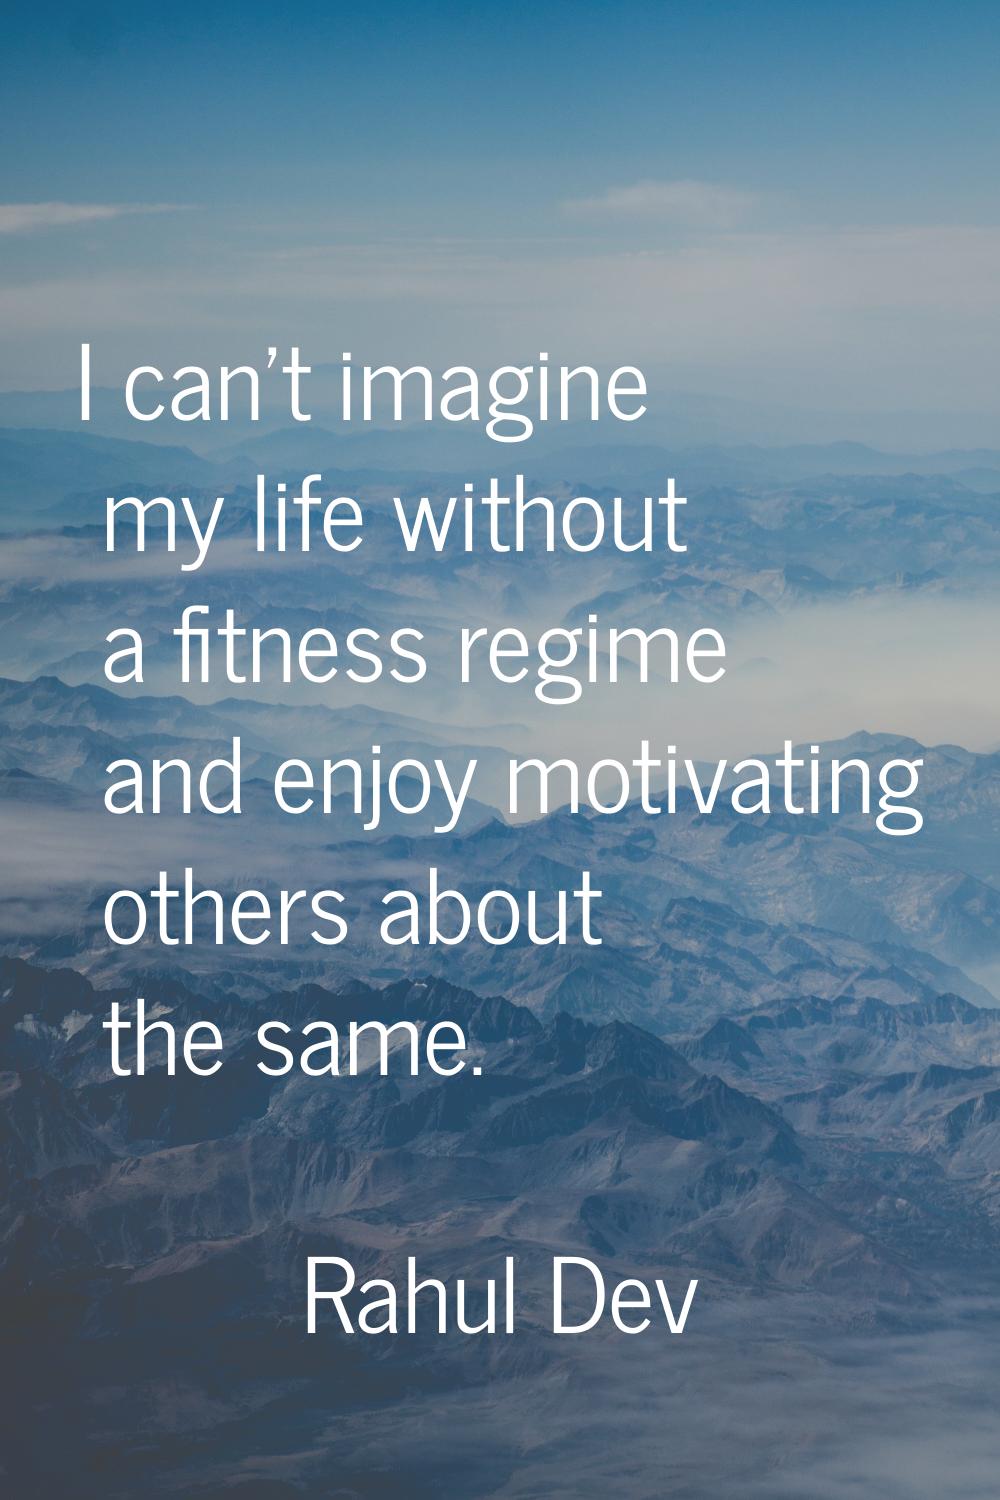 I can't imagine my life without a fitness regime and enjoy motivating others about the same.